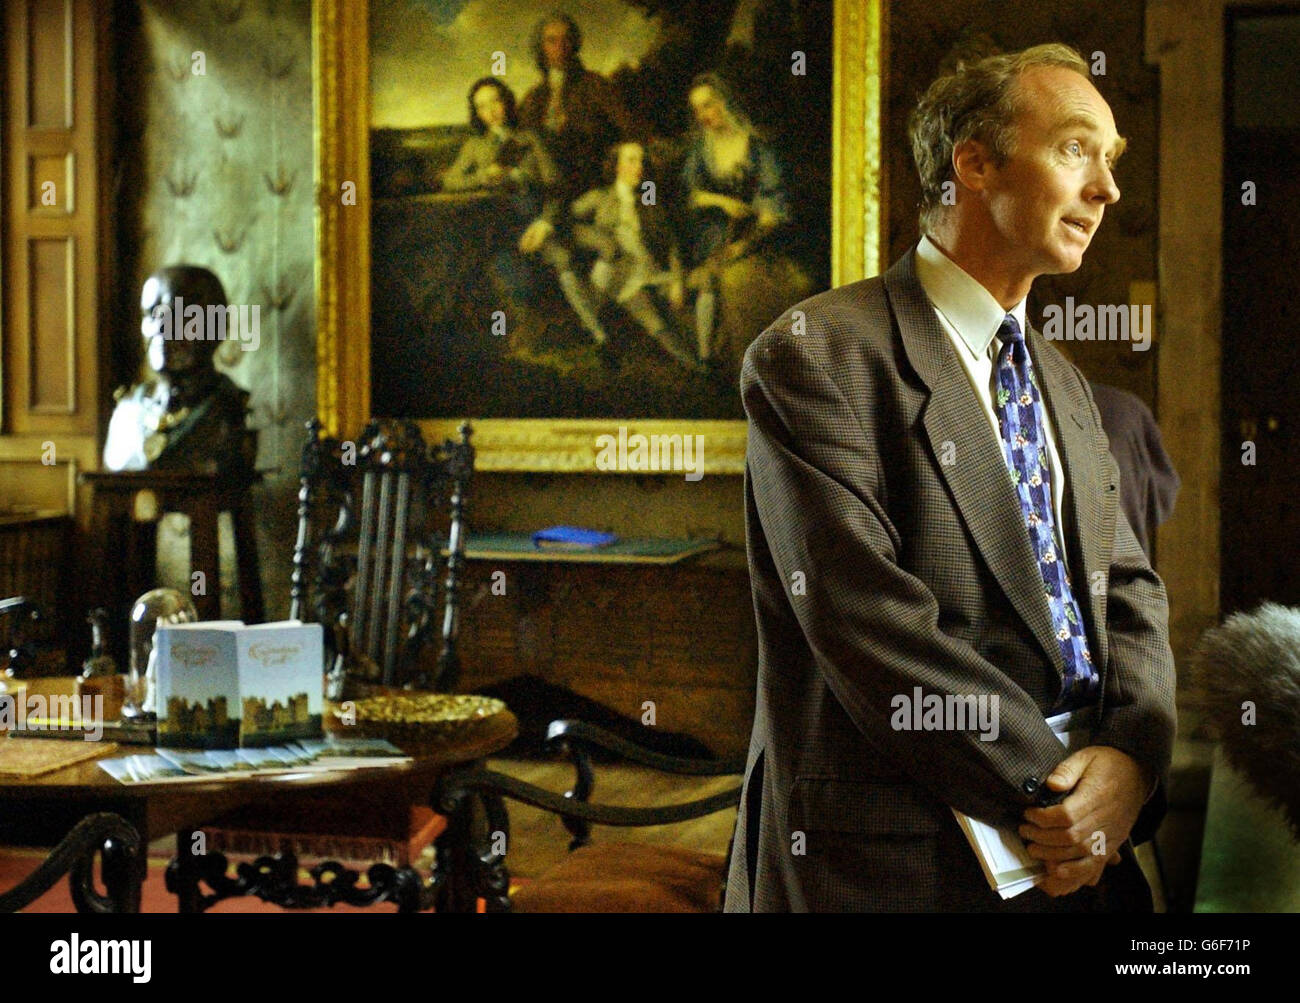 The Earl of Dalkeith before speaking to the media in the entrance hall of Drumlanrig Castle in Dumfries and Galloway. Insurers offered a six-figure reward for the recovery of a priceless Leonardo da Vinci masterpiece stolen from a castle belonging to one of the country's richest land owners. The work, The Madonna with Yarnwinder, was stolen in its frame by two men posing as visitors who overpowered a female guide at the ancestral home of the Duke of Buccleuch. Stock Photo